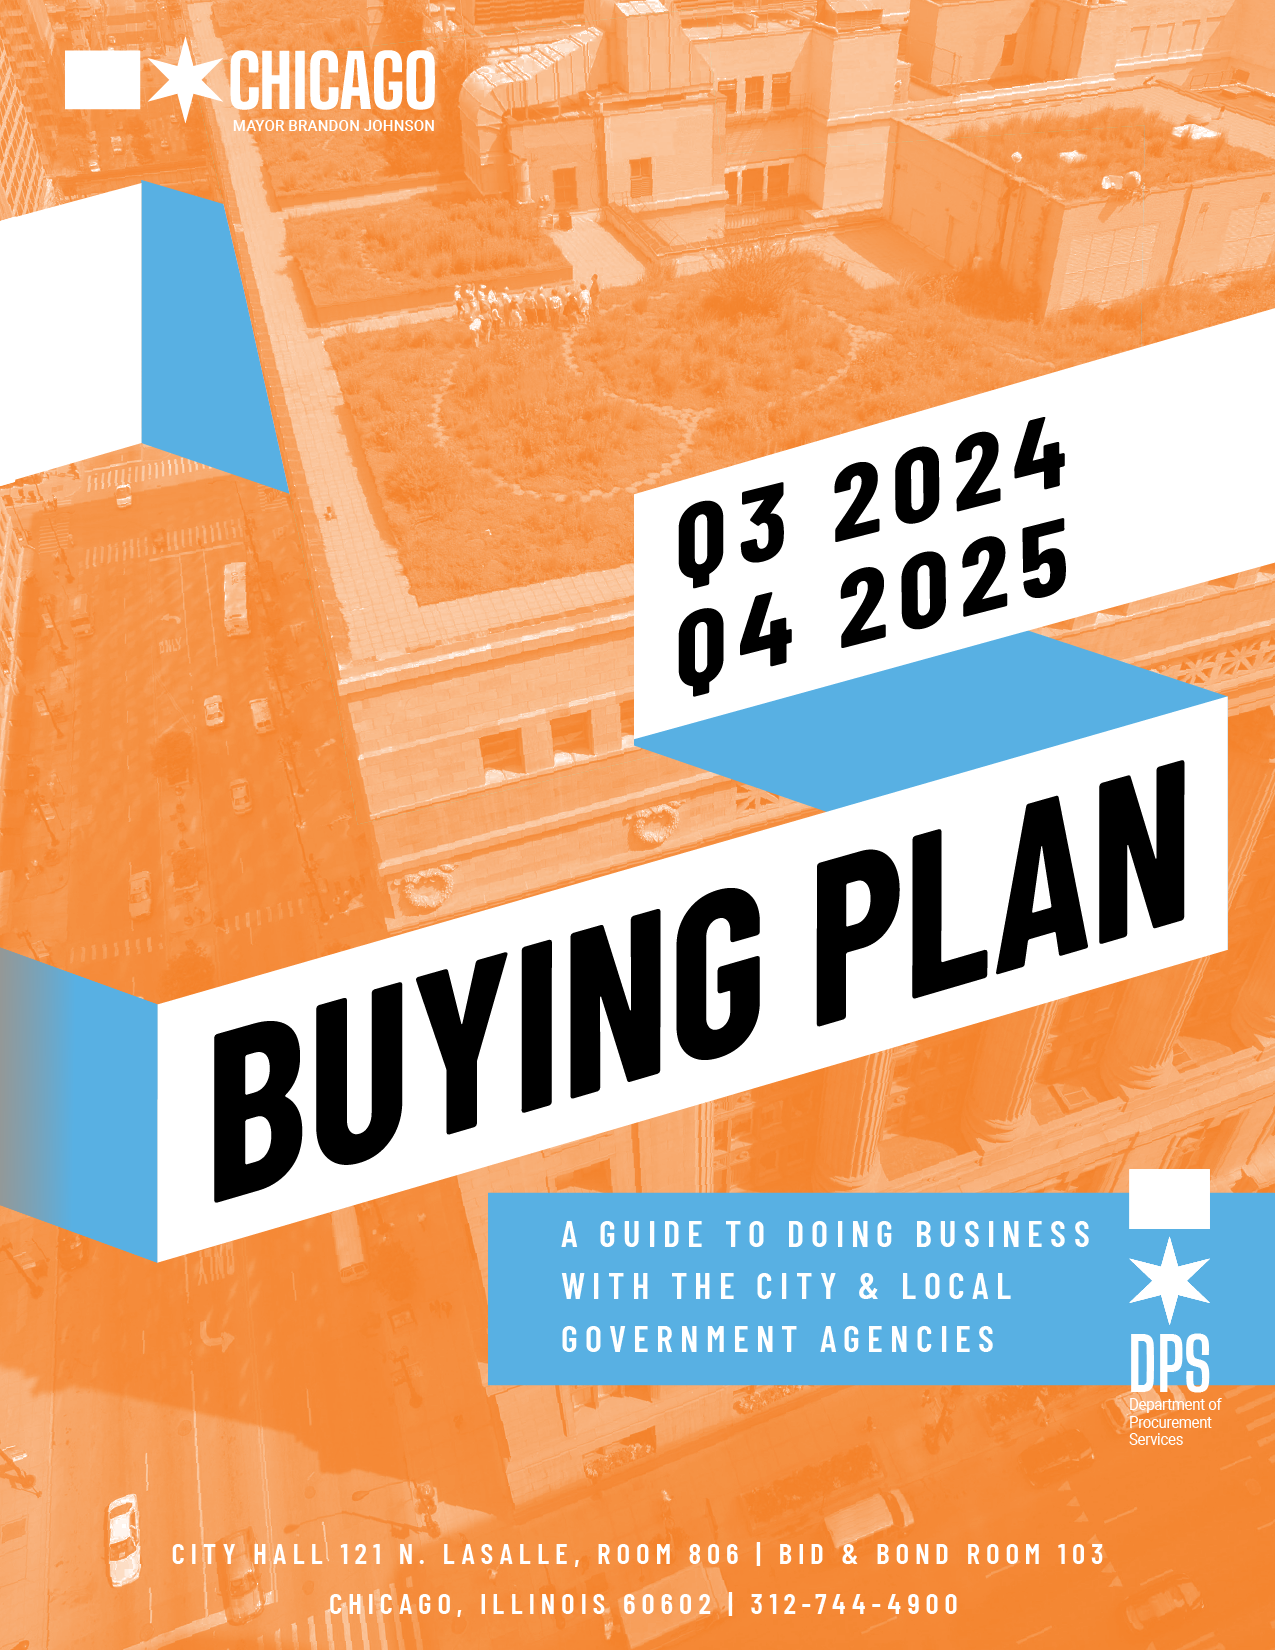 Thumbnail image of the City of Chicago Consolidated Buying Plan front cover, using a background image of a high-rise under construction from the perspective of a pedestrian. "City of Chicago Buying Plan, first quarter 2024 through second quarter 2025. A guide to doing business with the City and government agencies: City of Chicago, Sister Agencies, Cook County.